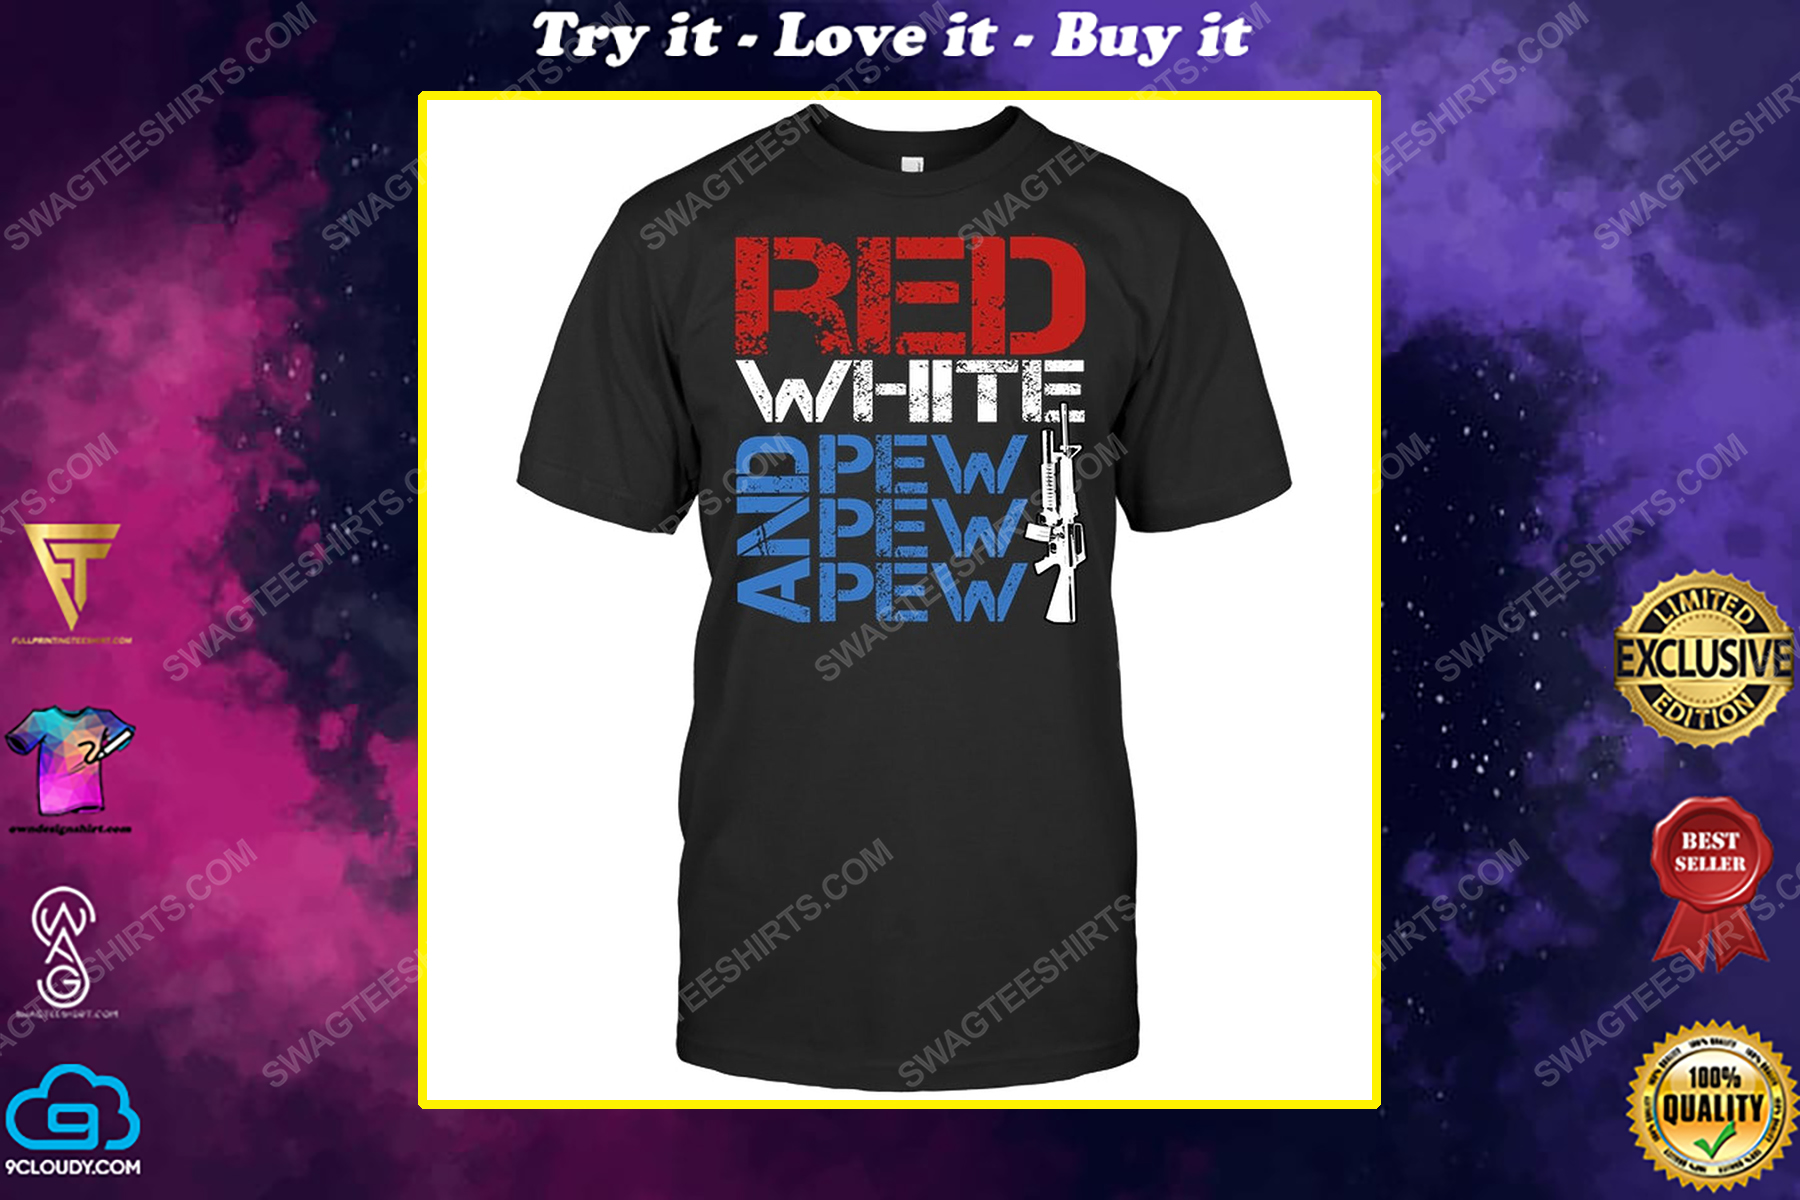 Red white and pew pew pew gun political shirt